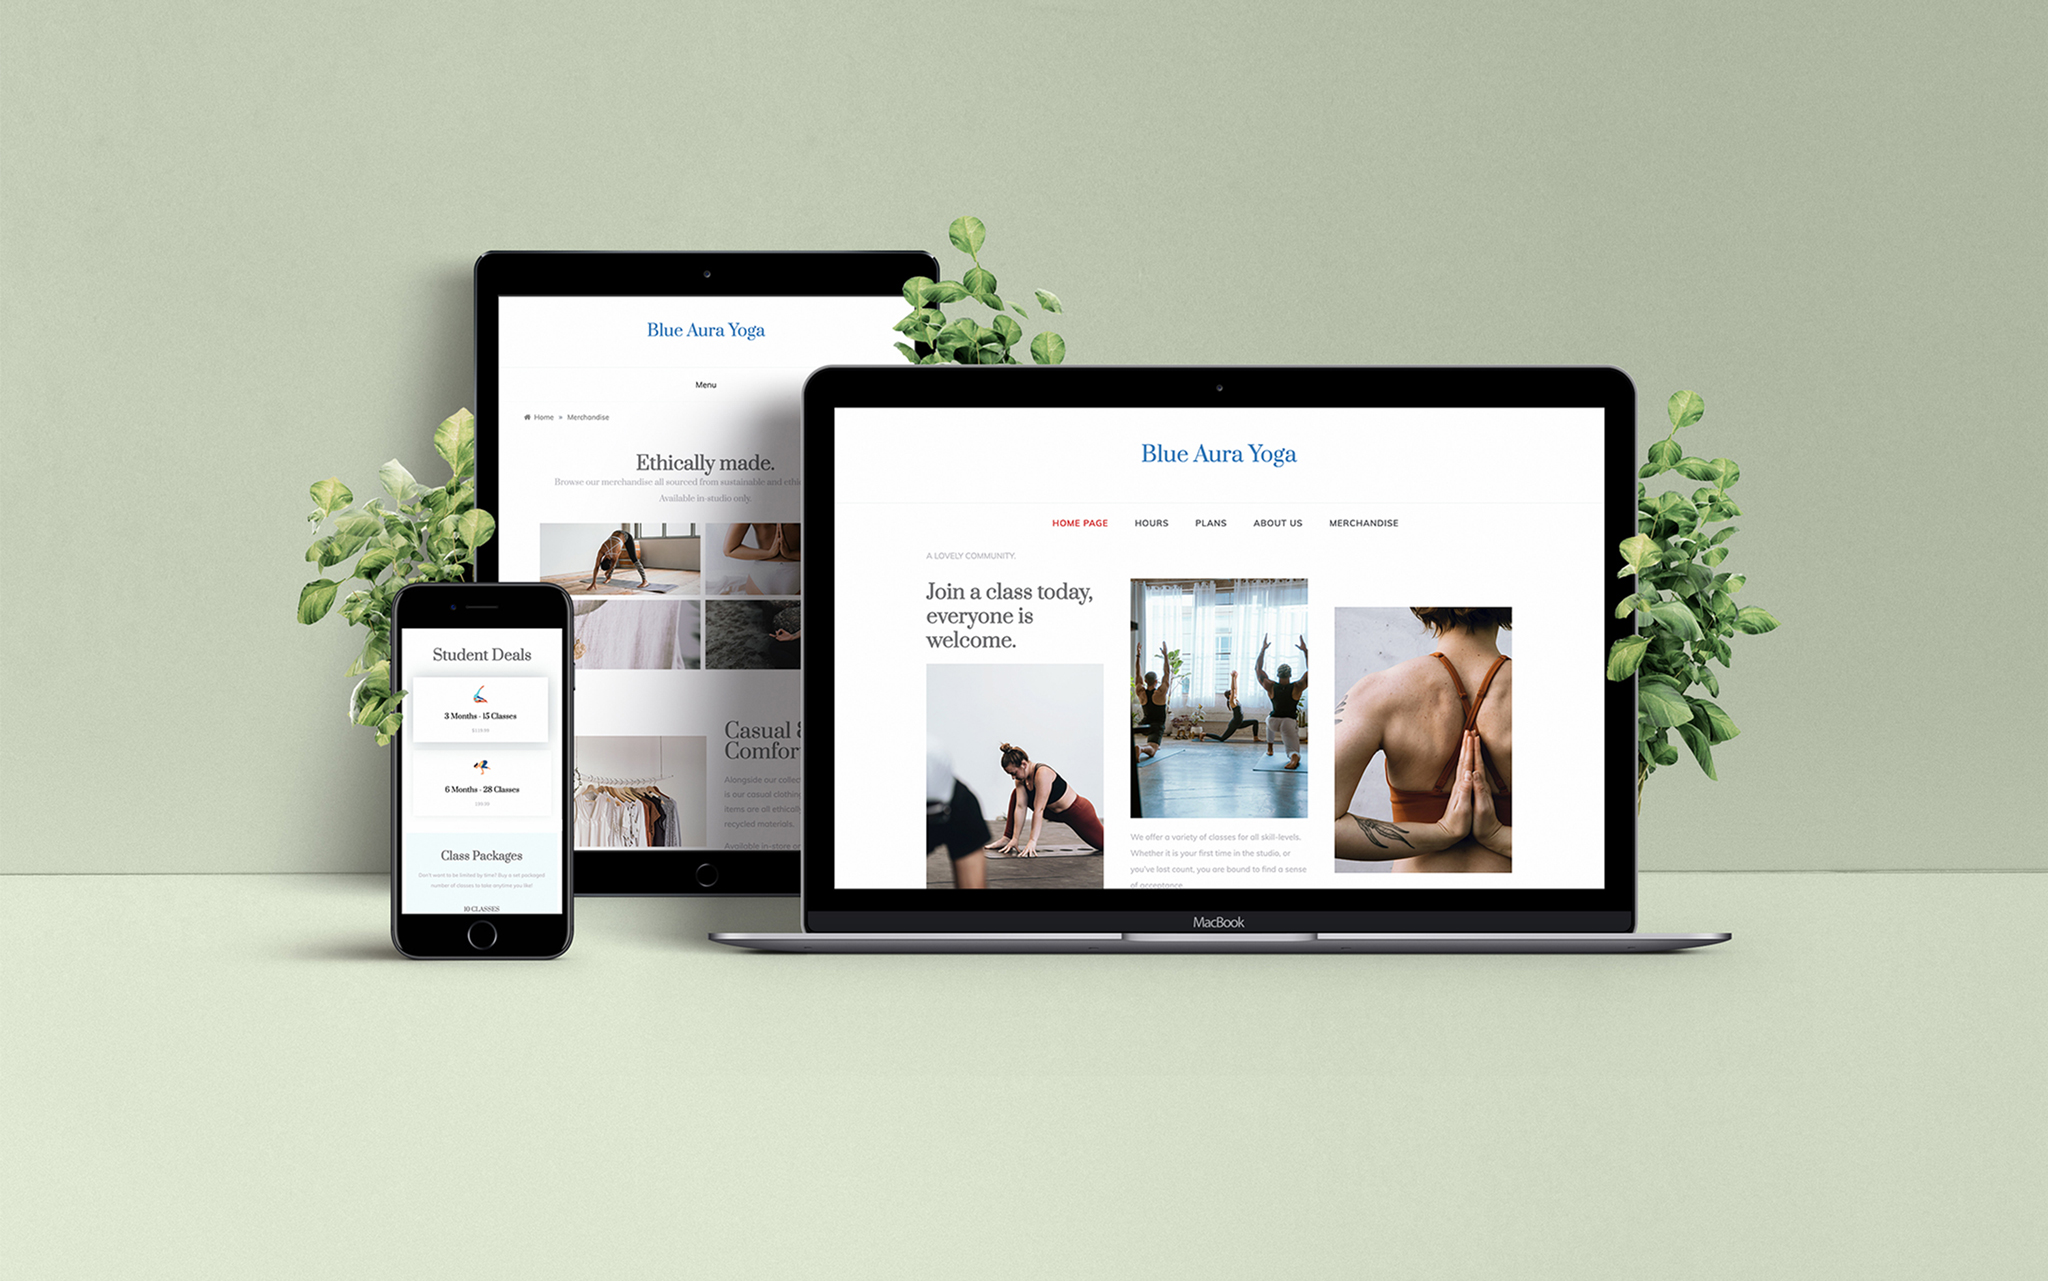 Mockup of website design for an imagined yoga studio. It is a completely responsive website design, as displayed on a laptop, mobile, and an iphone.